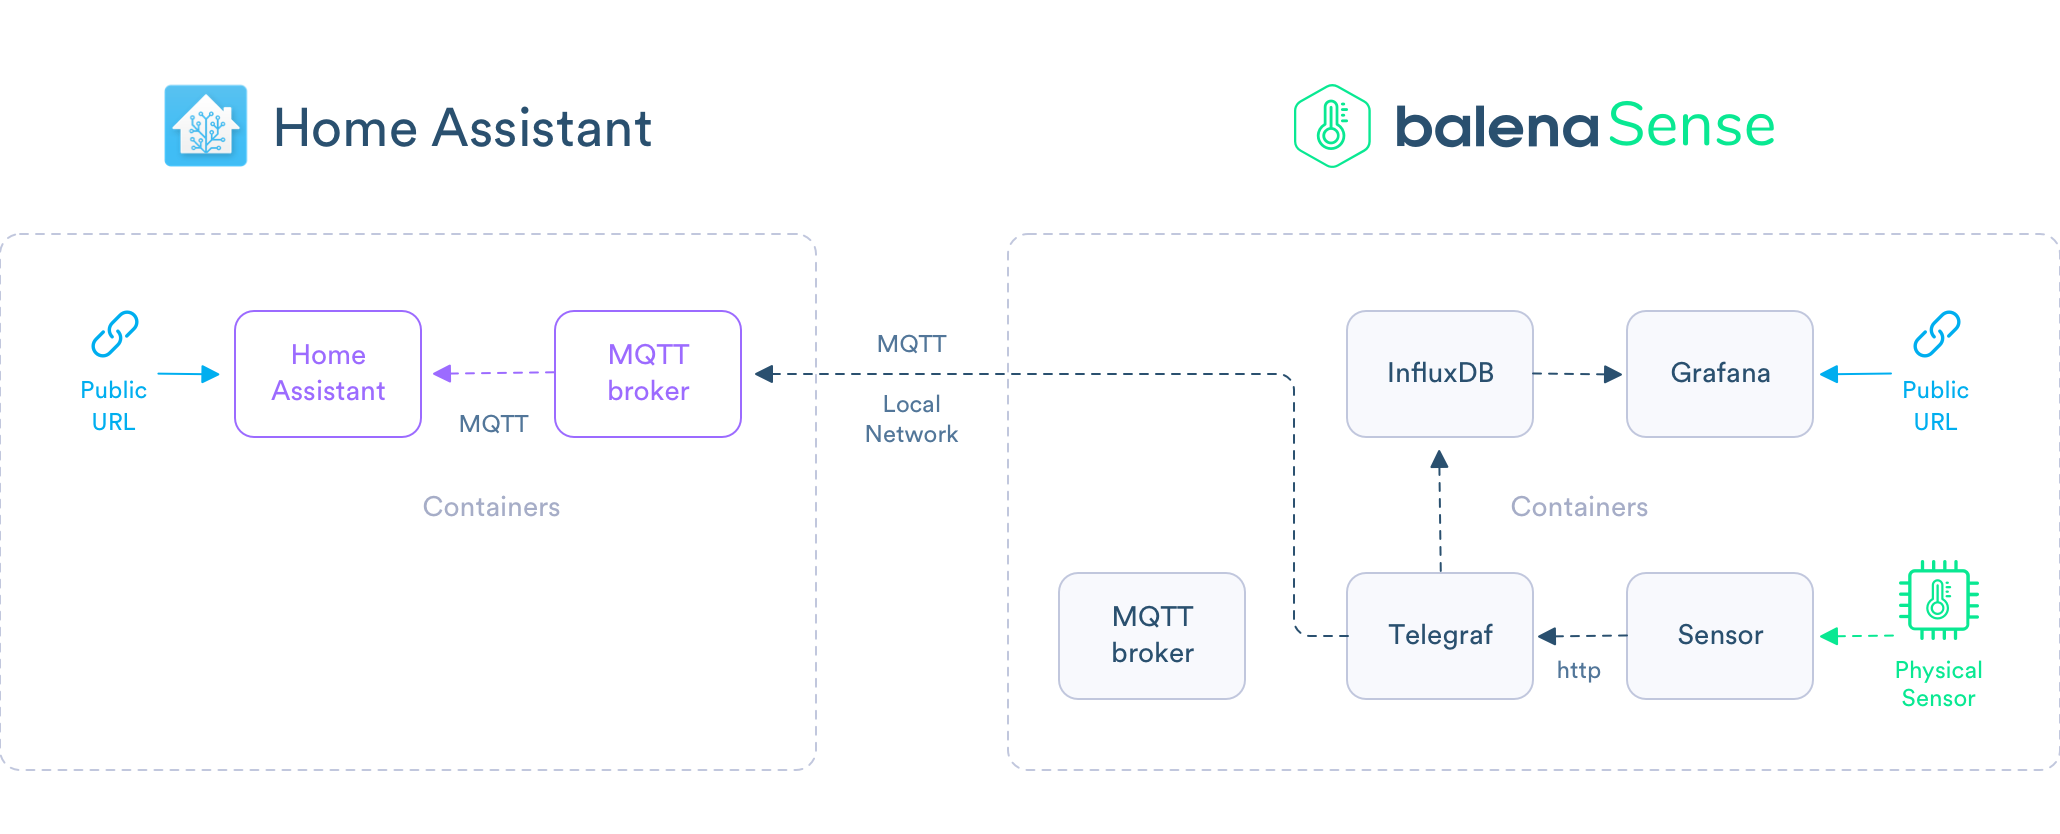 Here's a high-level look at how we integrate balenaSense with Home Assistant via MQTT broker